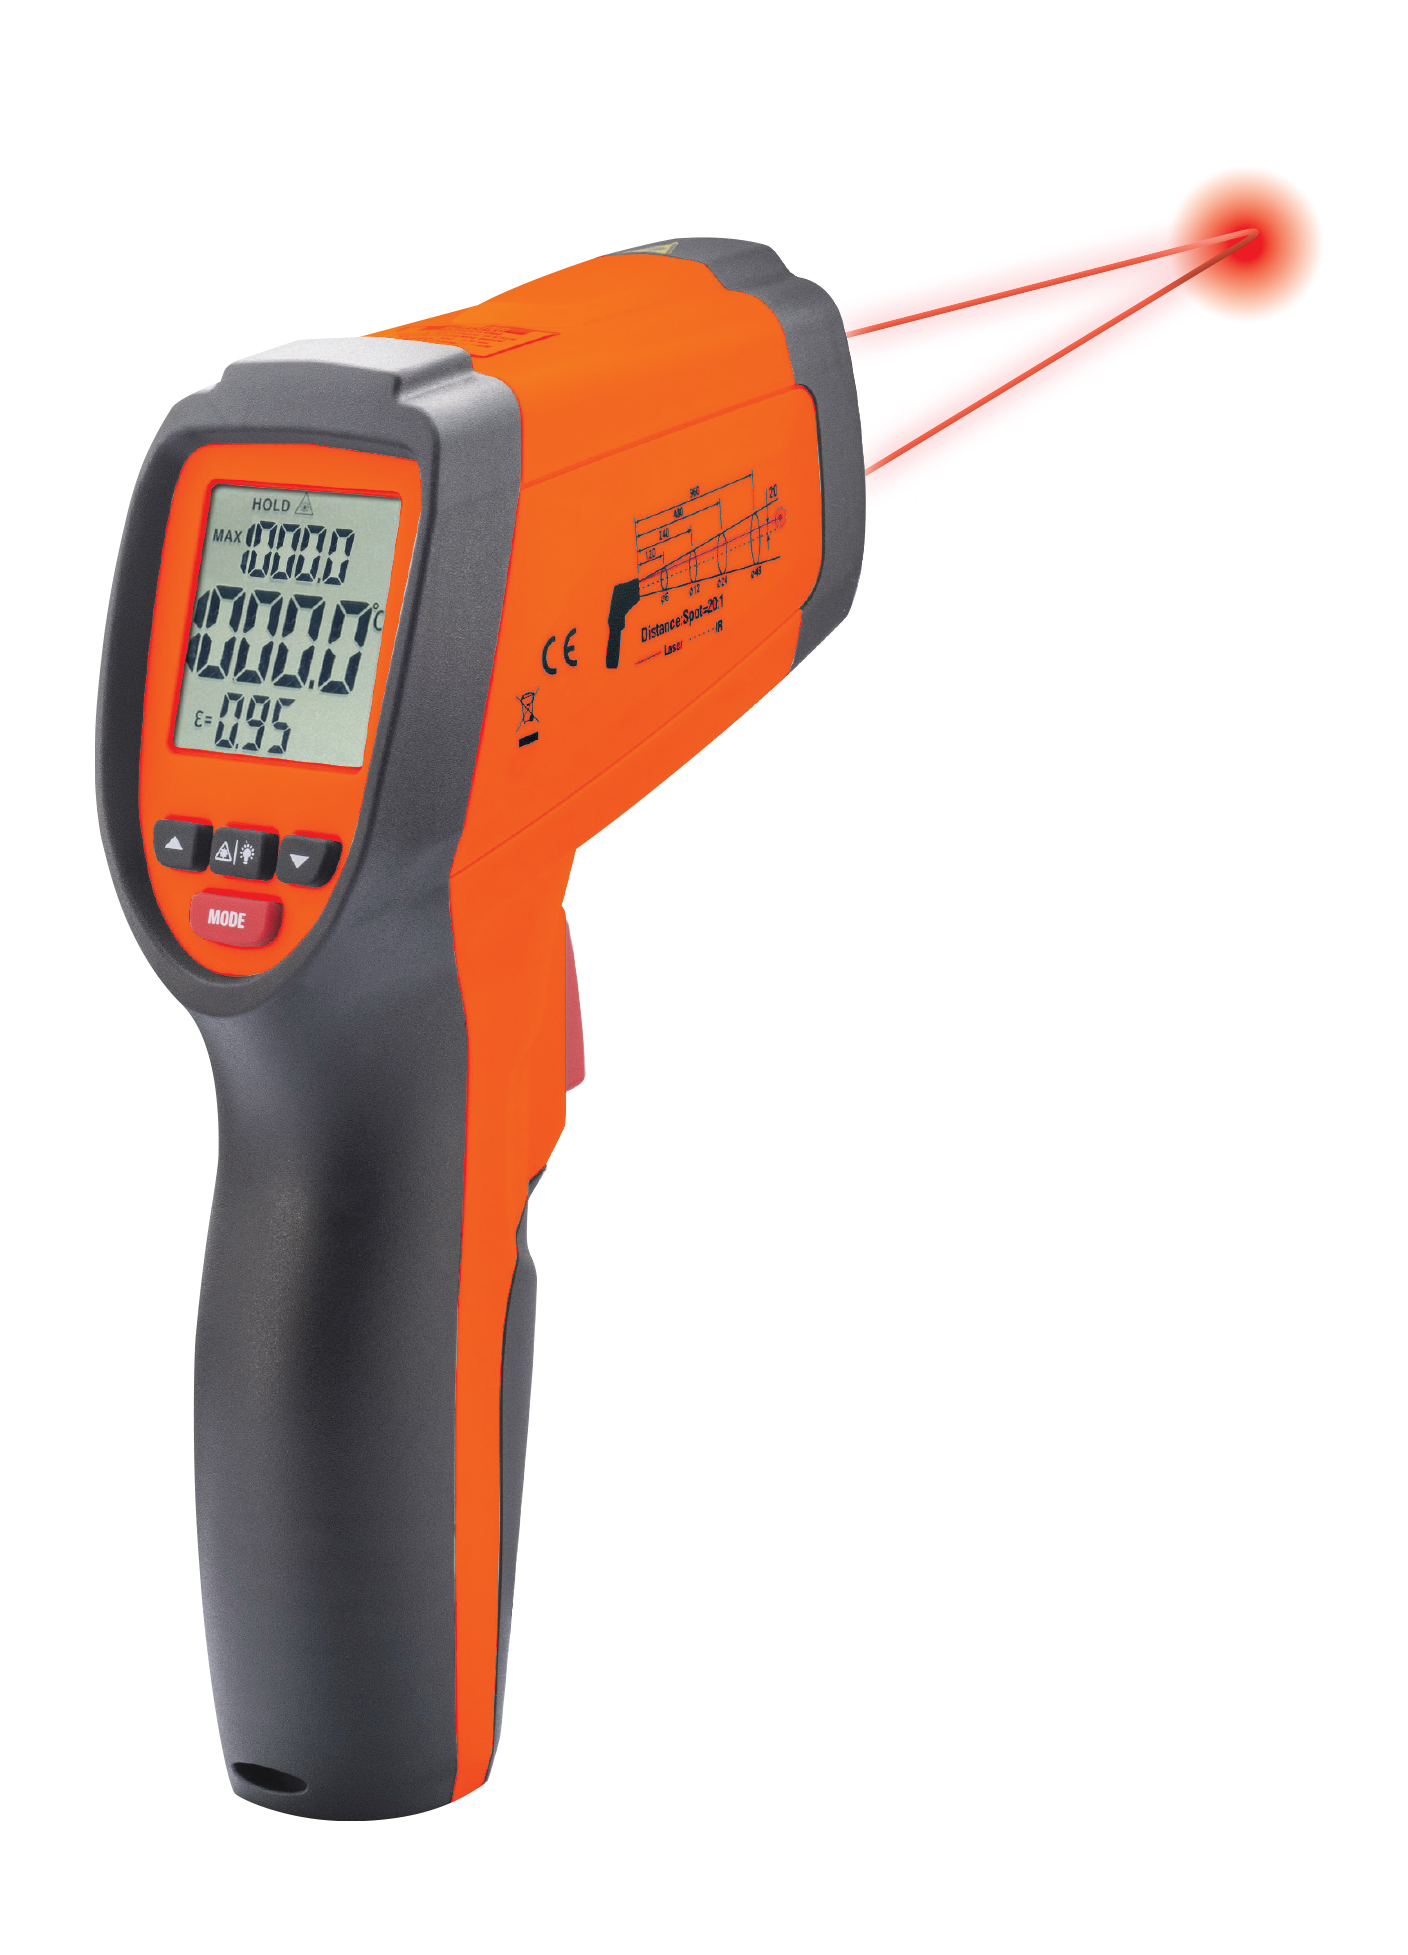 ZI-9689 Infrared Thermometer 850C